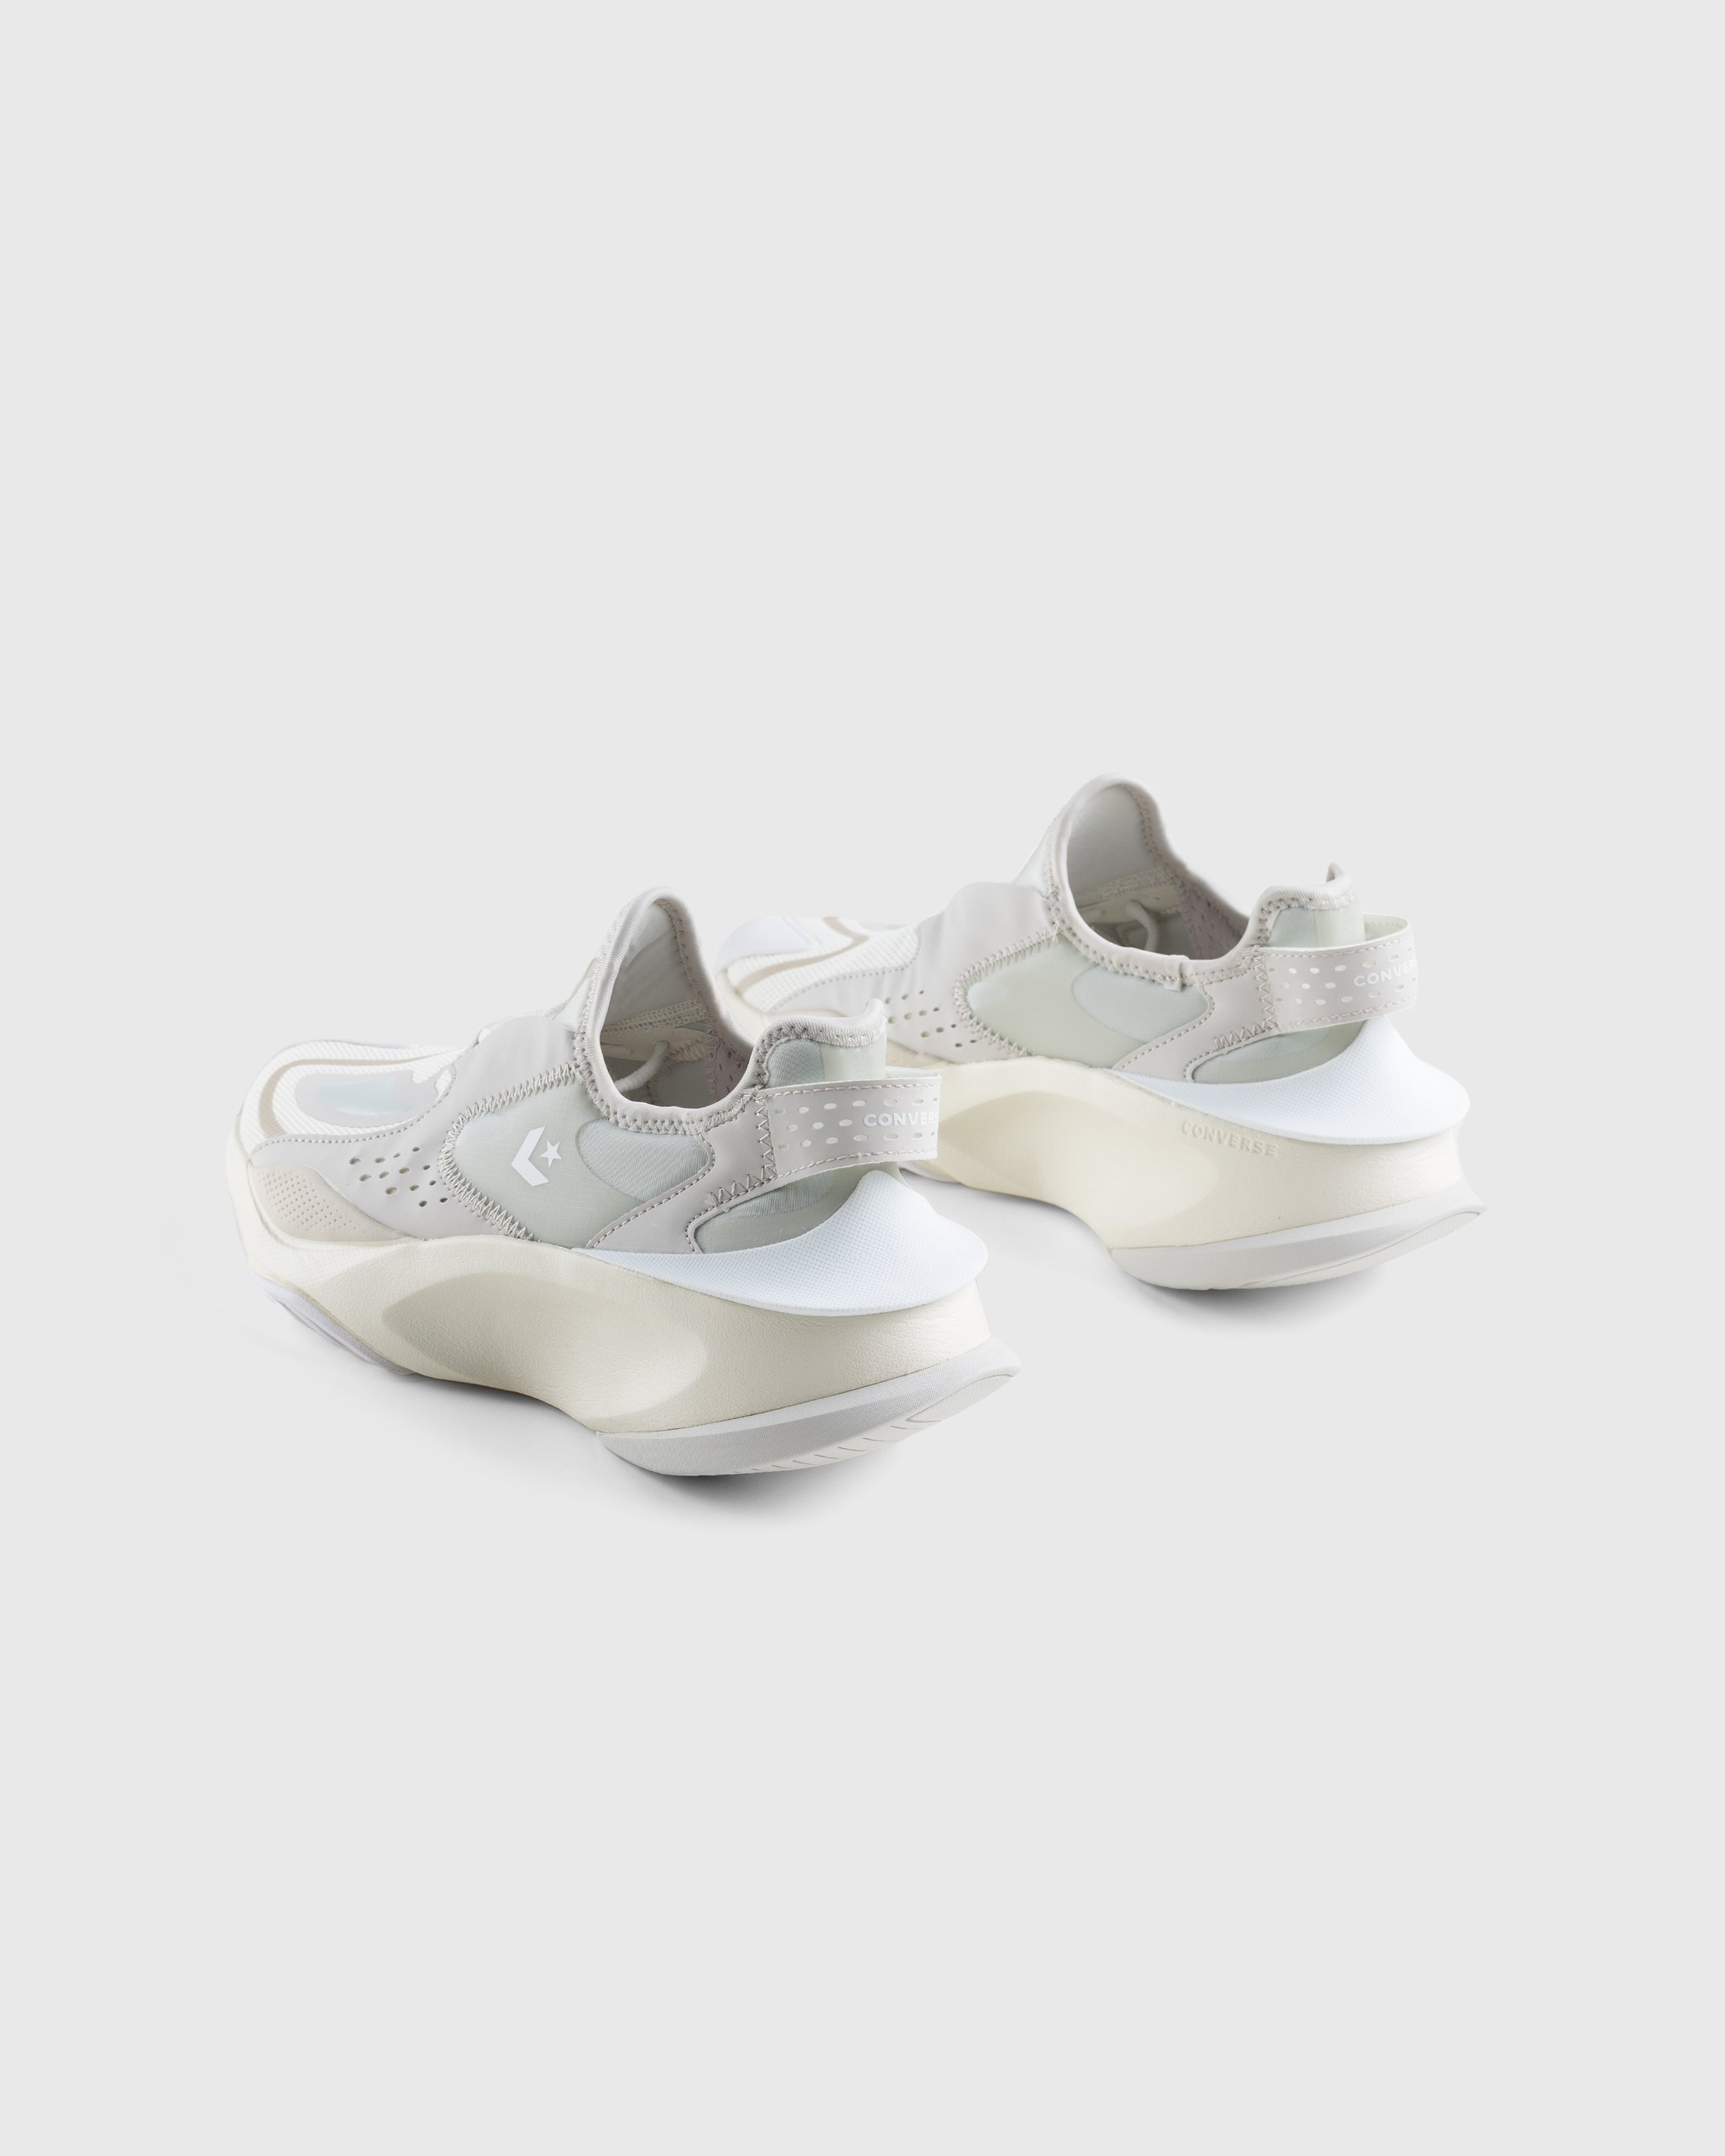 Converse – Aeon Active Cx Ox Egret/Pale Putty - Low Top Sneakers - White - Image 4